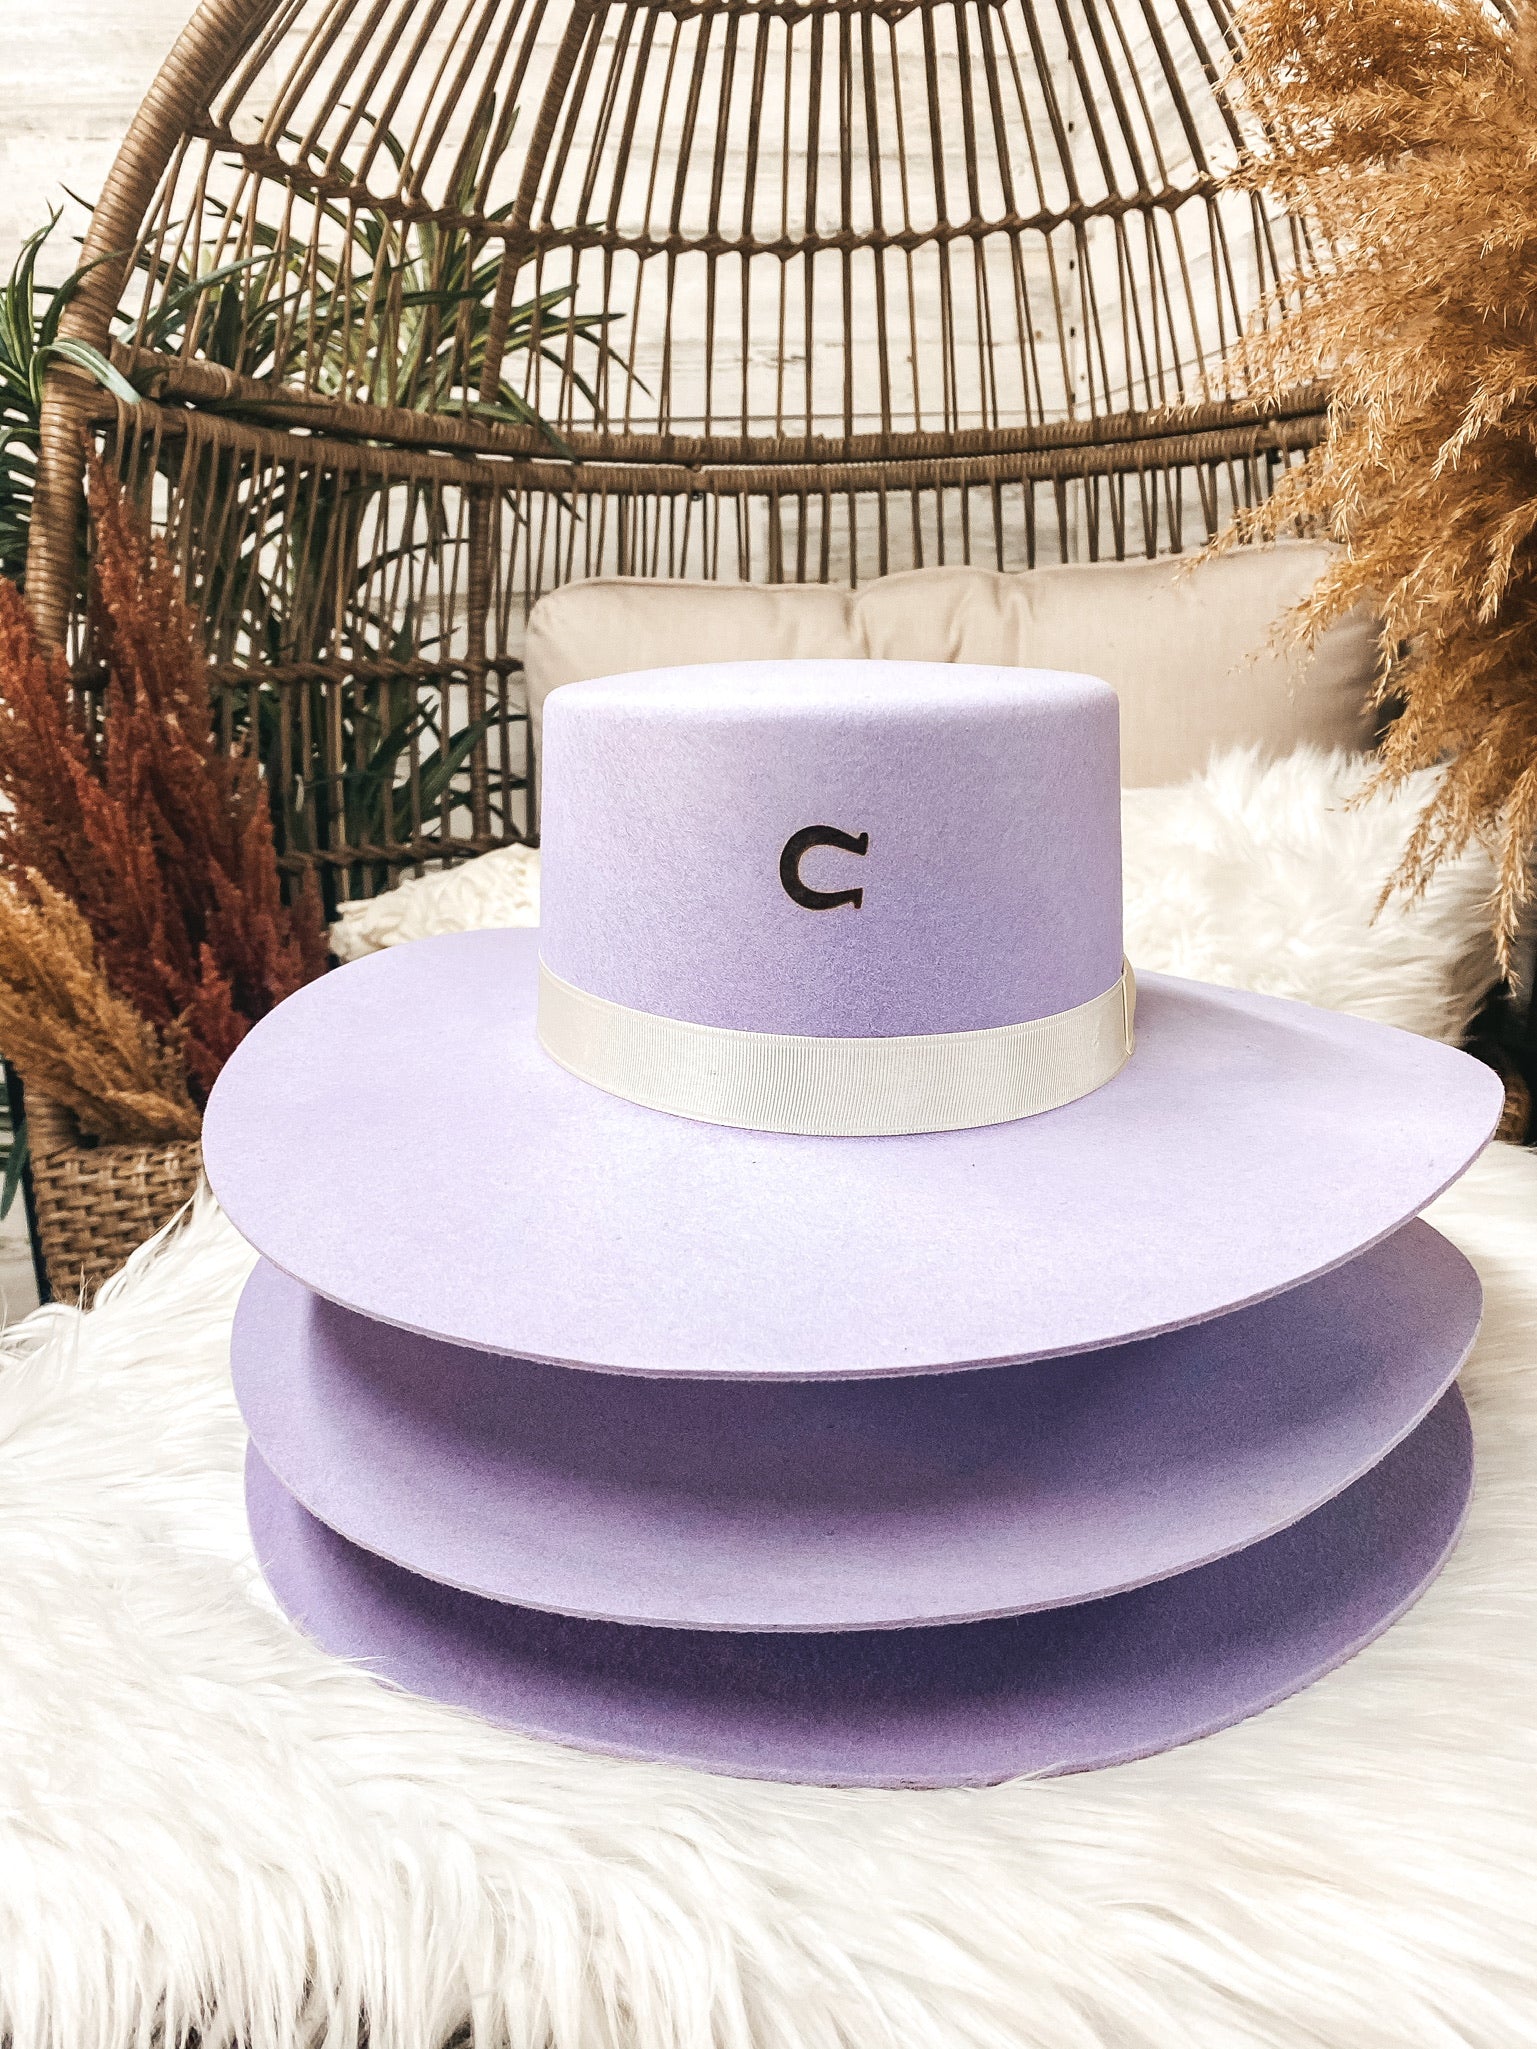 Charlie 1 Horse | Tumbleweed Wool Felt Hat with Crossed Arrow Pendant in Periwinkle - Giddy Up Glamour Boutique